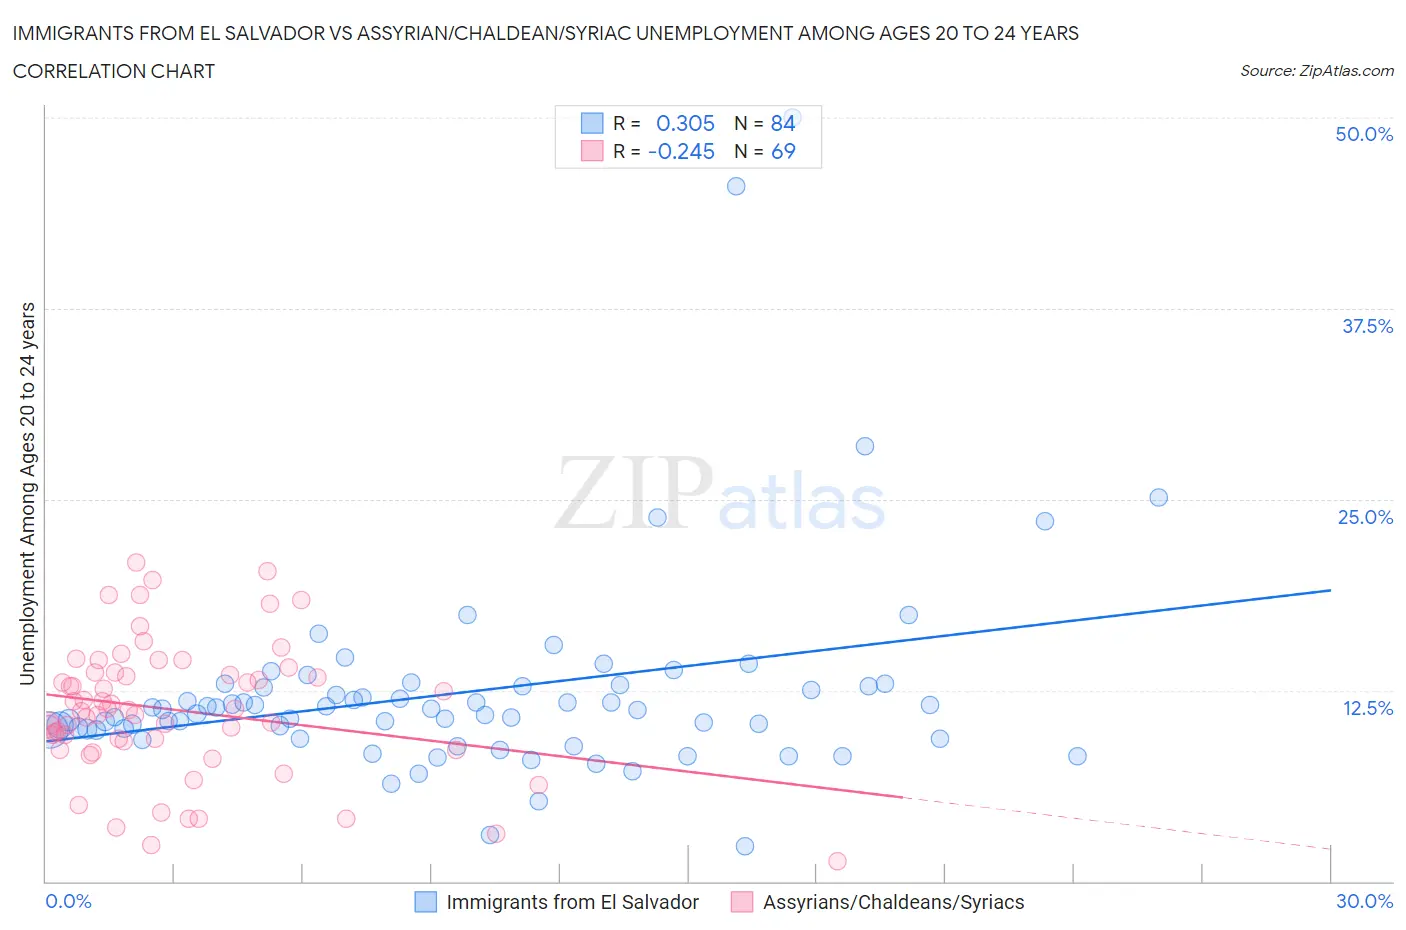 Immigrants from El Salvador vs Assyrian/Chaldean/Syriac Unemployment Among Ages 20 to 24 years